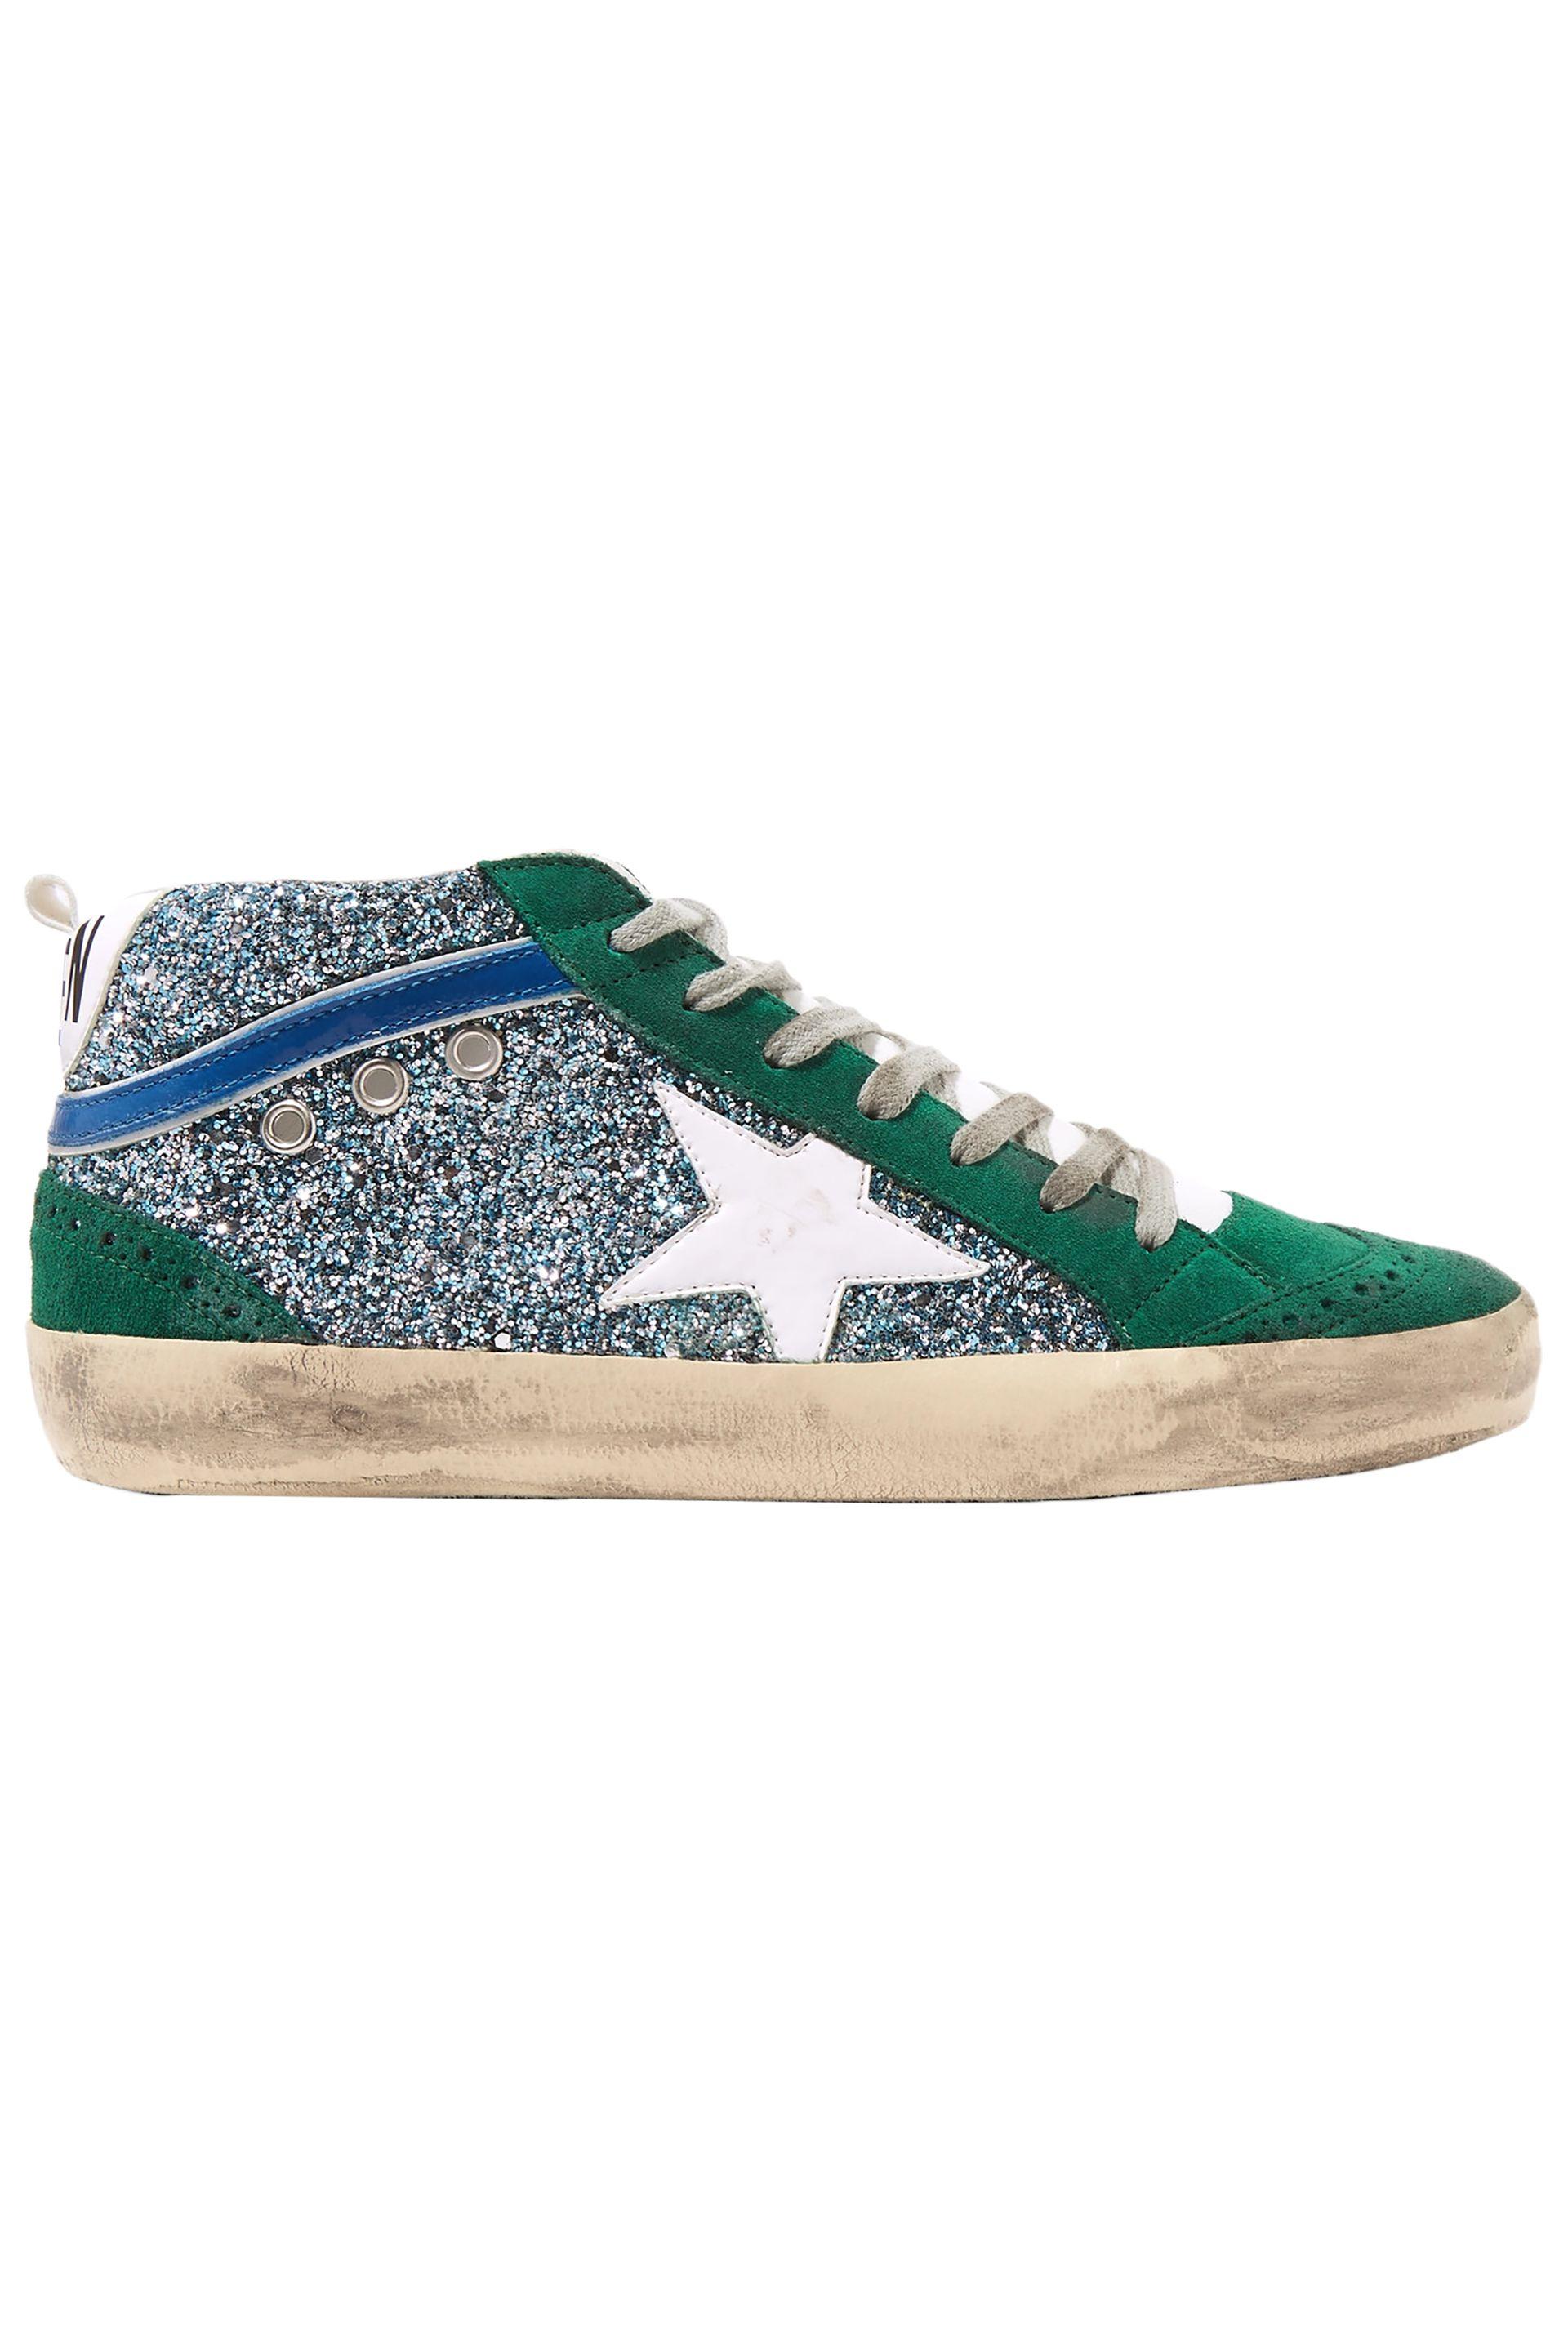 Golden Goose Green Mid Star Glitter Suede And Leather Sneakers | Lyst